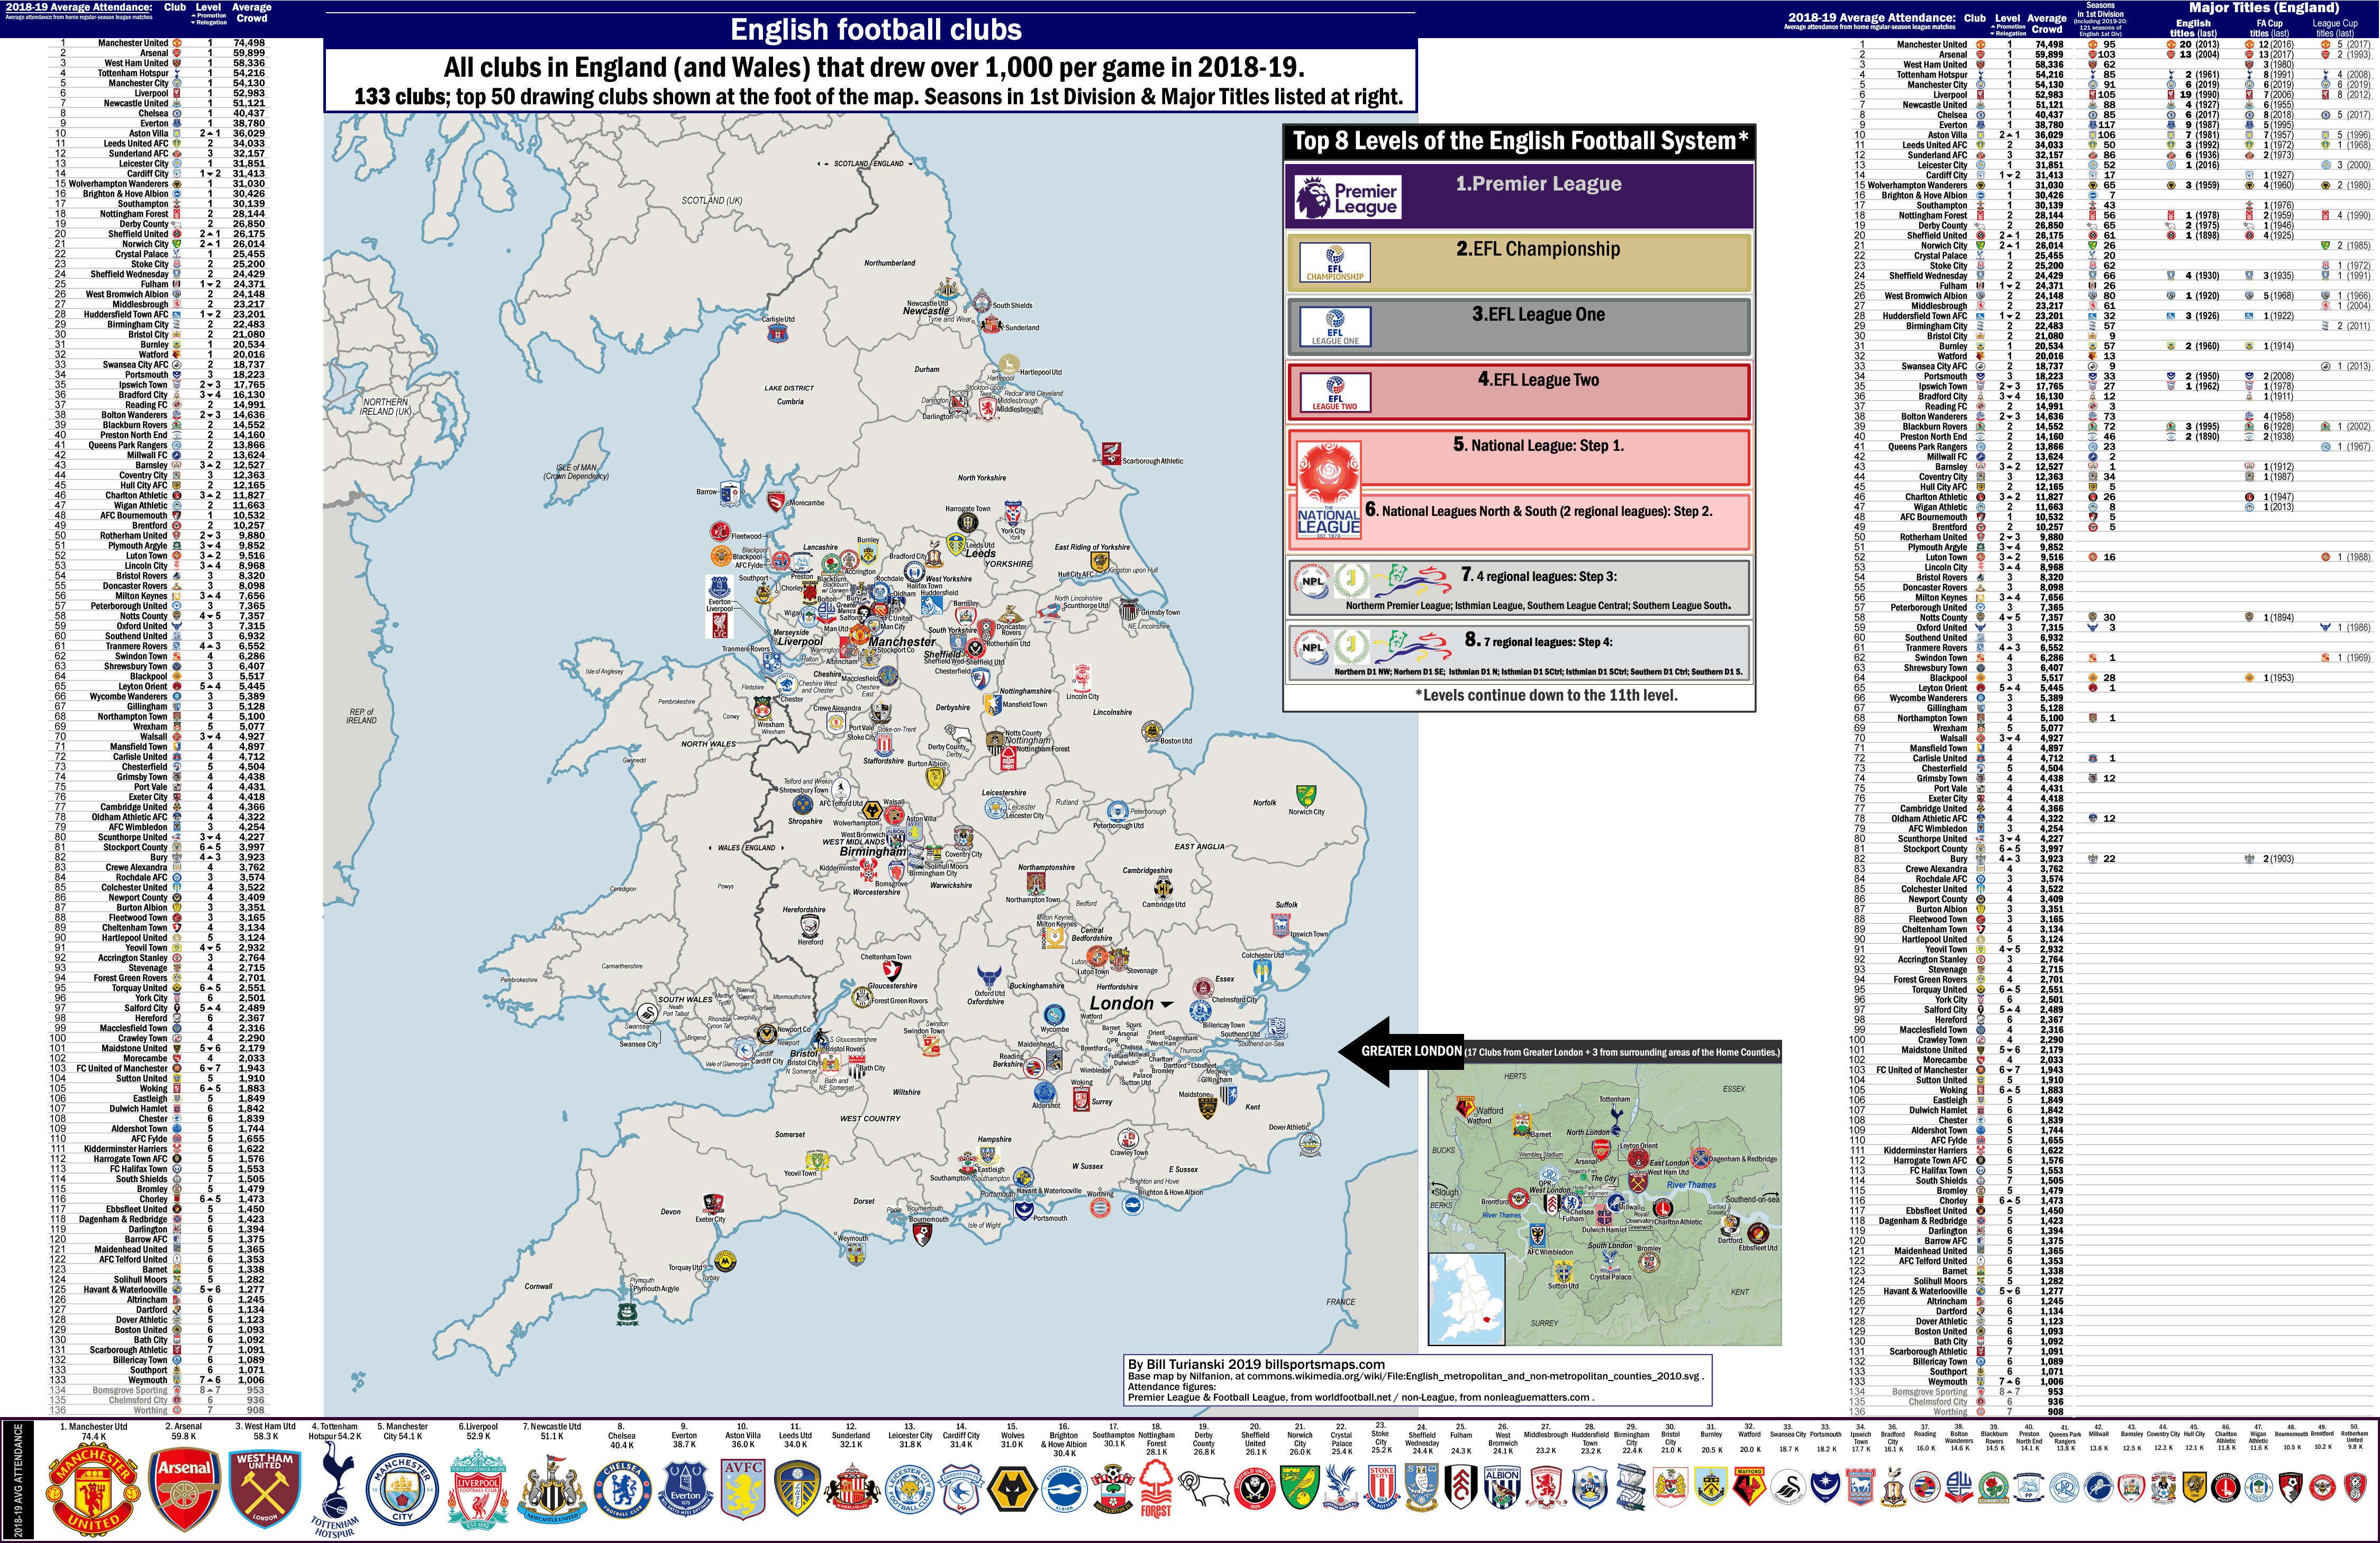 england_map_2018-19_attendance_all-133-clubs-drawing-over-1k-per-game_n_.gif